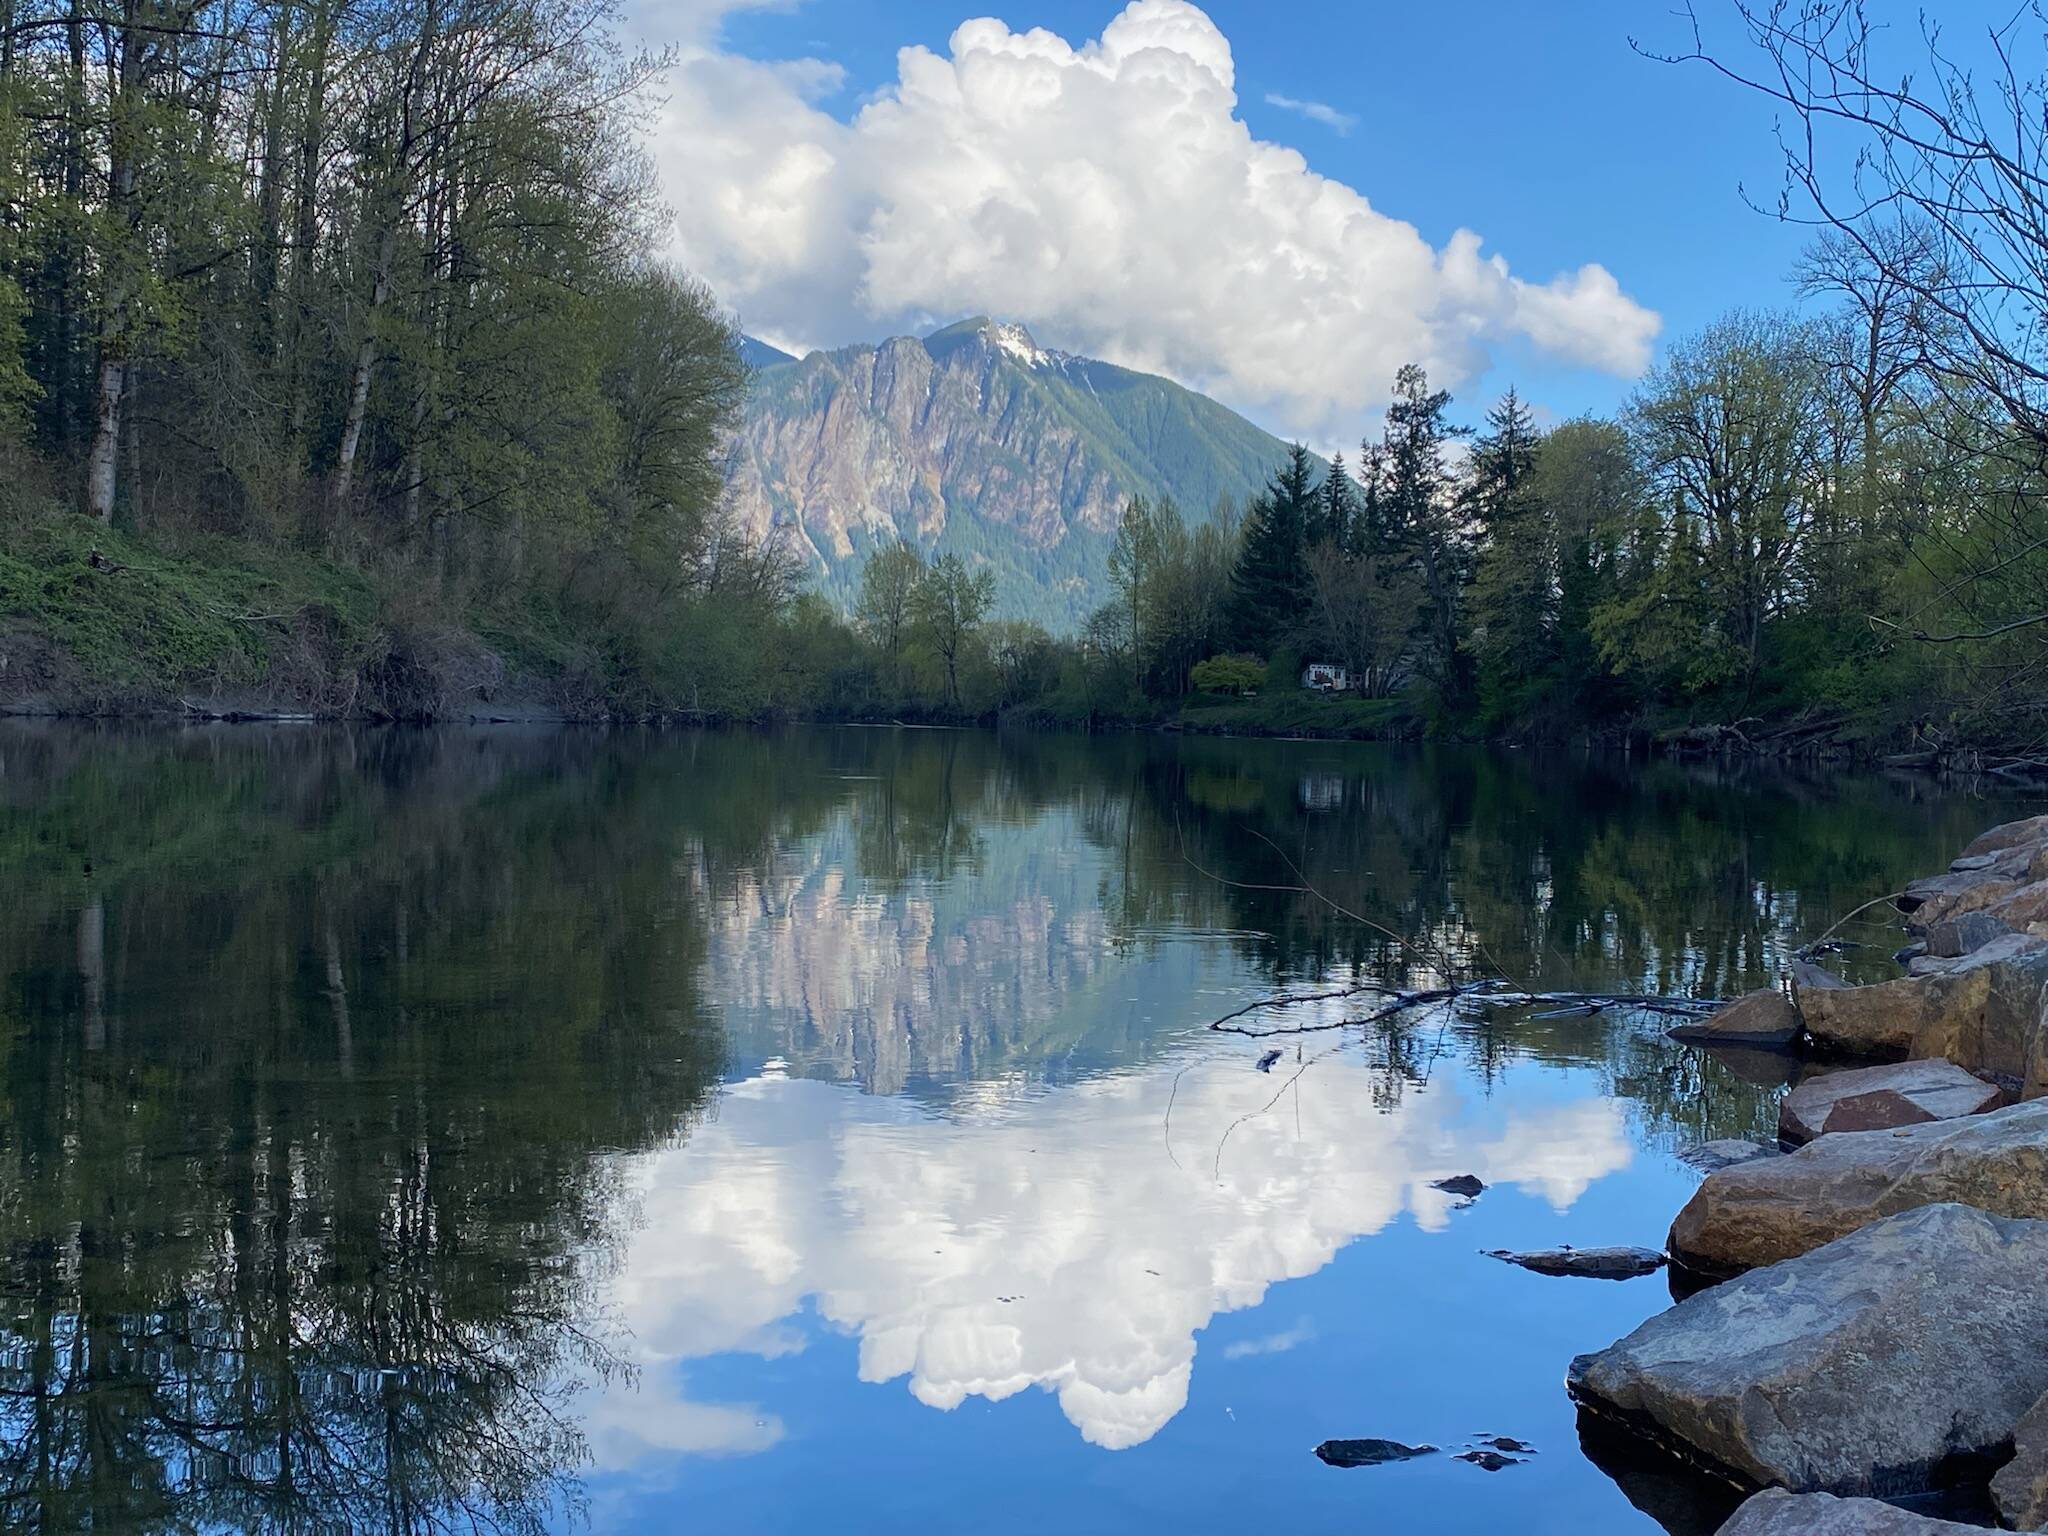 The Snoqualmie River near Park Avenue in Snoqualmie. Photo by William Shaw/Valley Record